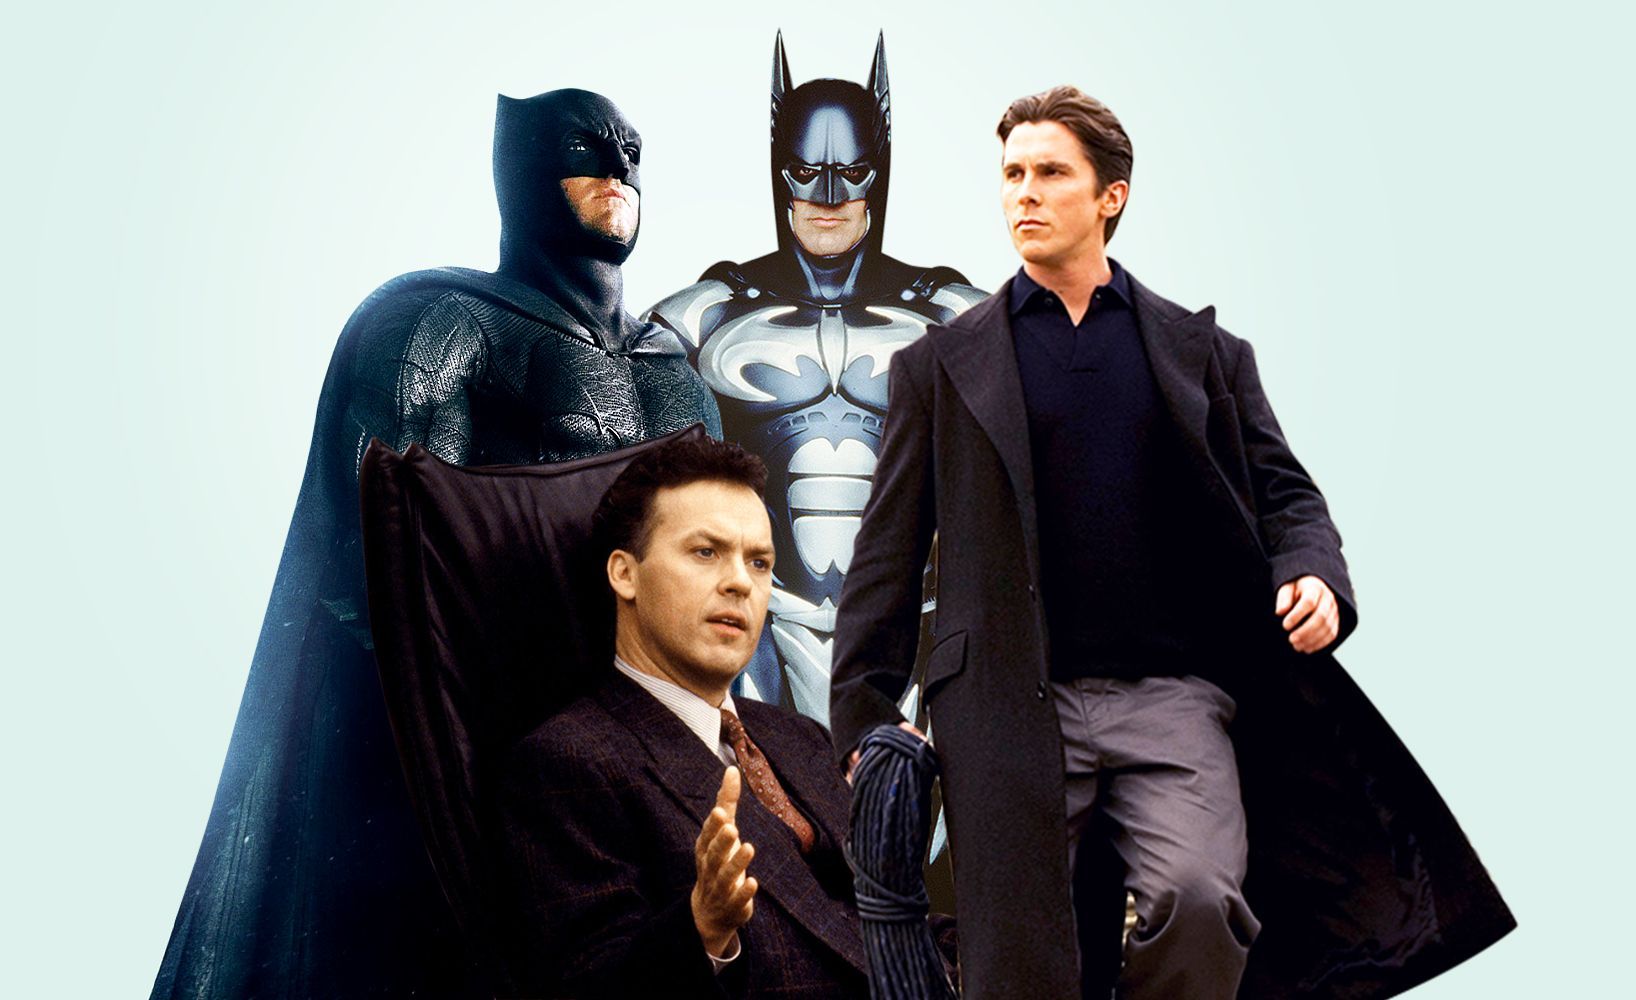 Batman Movies in Order - How Many Batman Films Have Been Made?